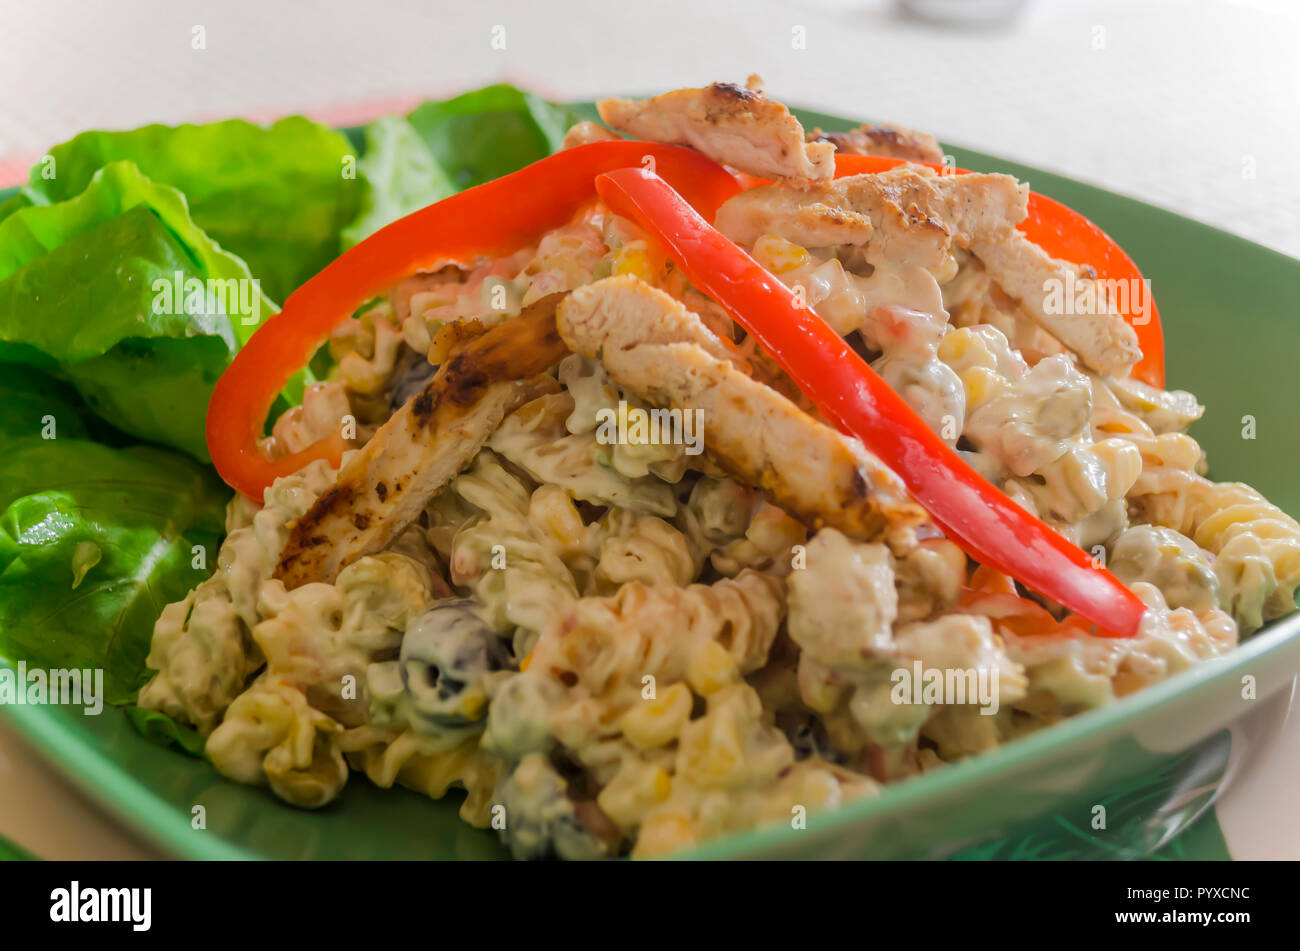 Cold summer pasta with grilled or grilled chicken is a dish delight with an exquisite flavor due to the combination of al dente pasta, fresh vegetable Stock Photo